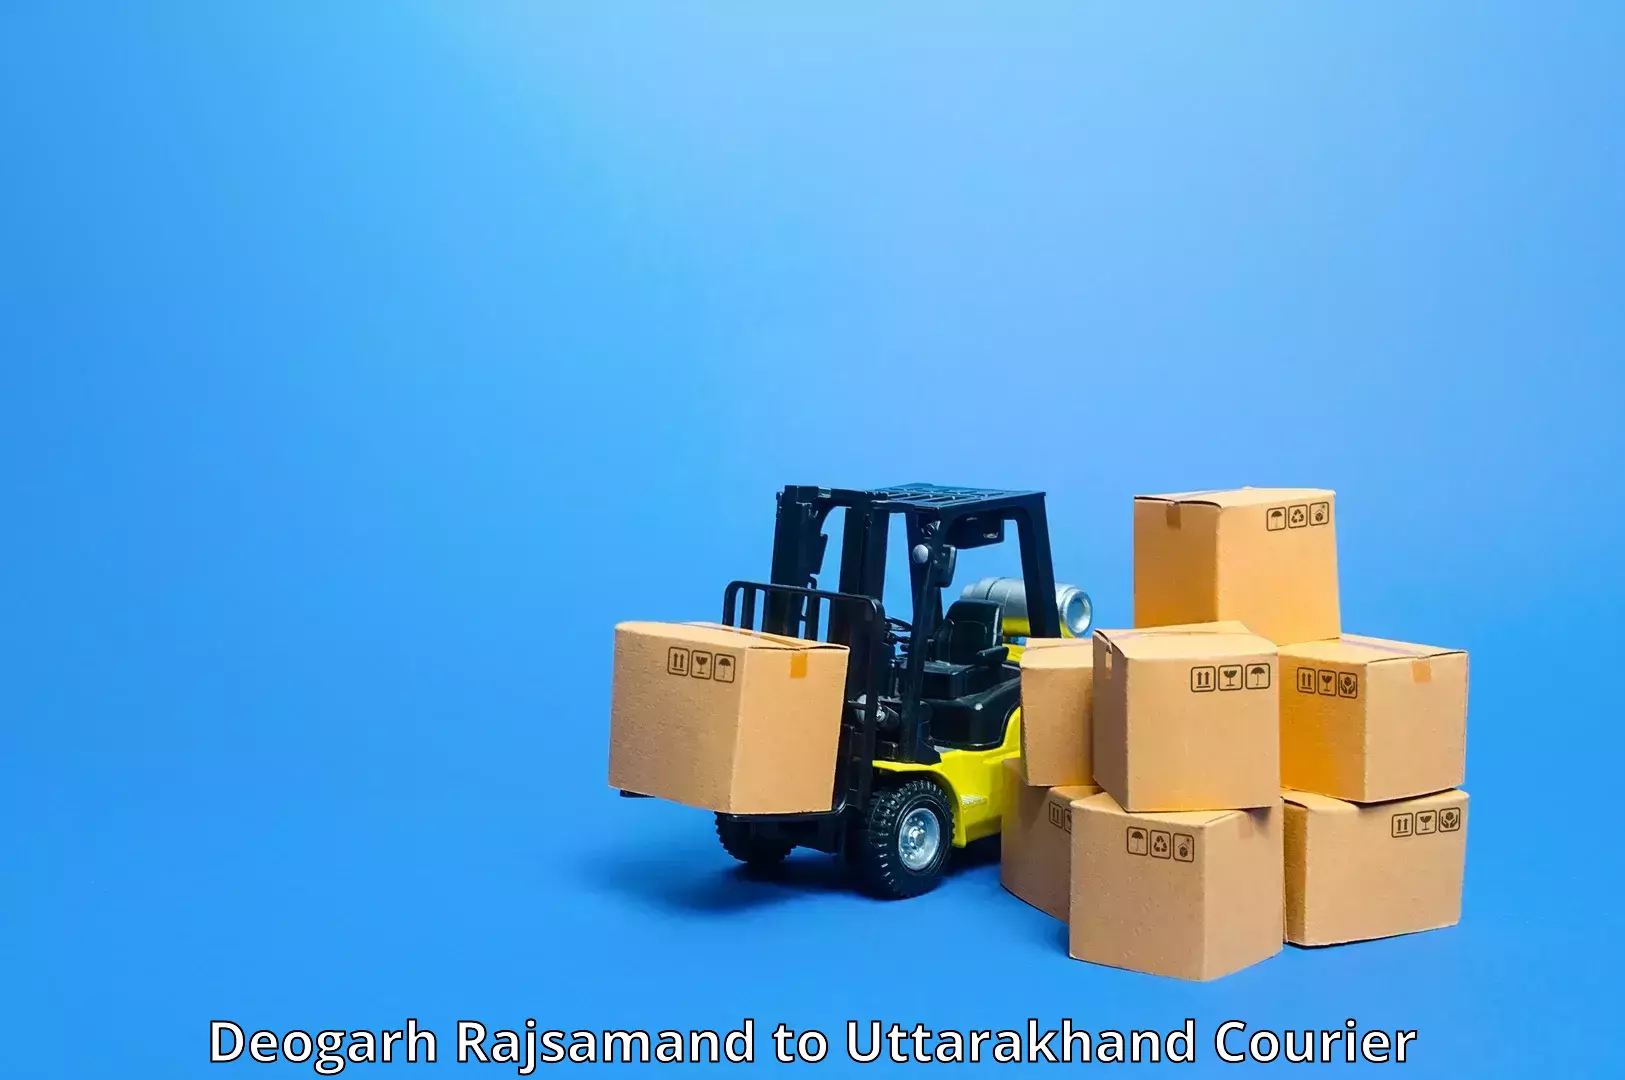 Nationwide courier service Deogarh Rajsamand to Rudrapur